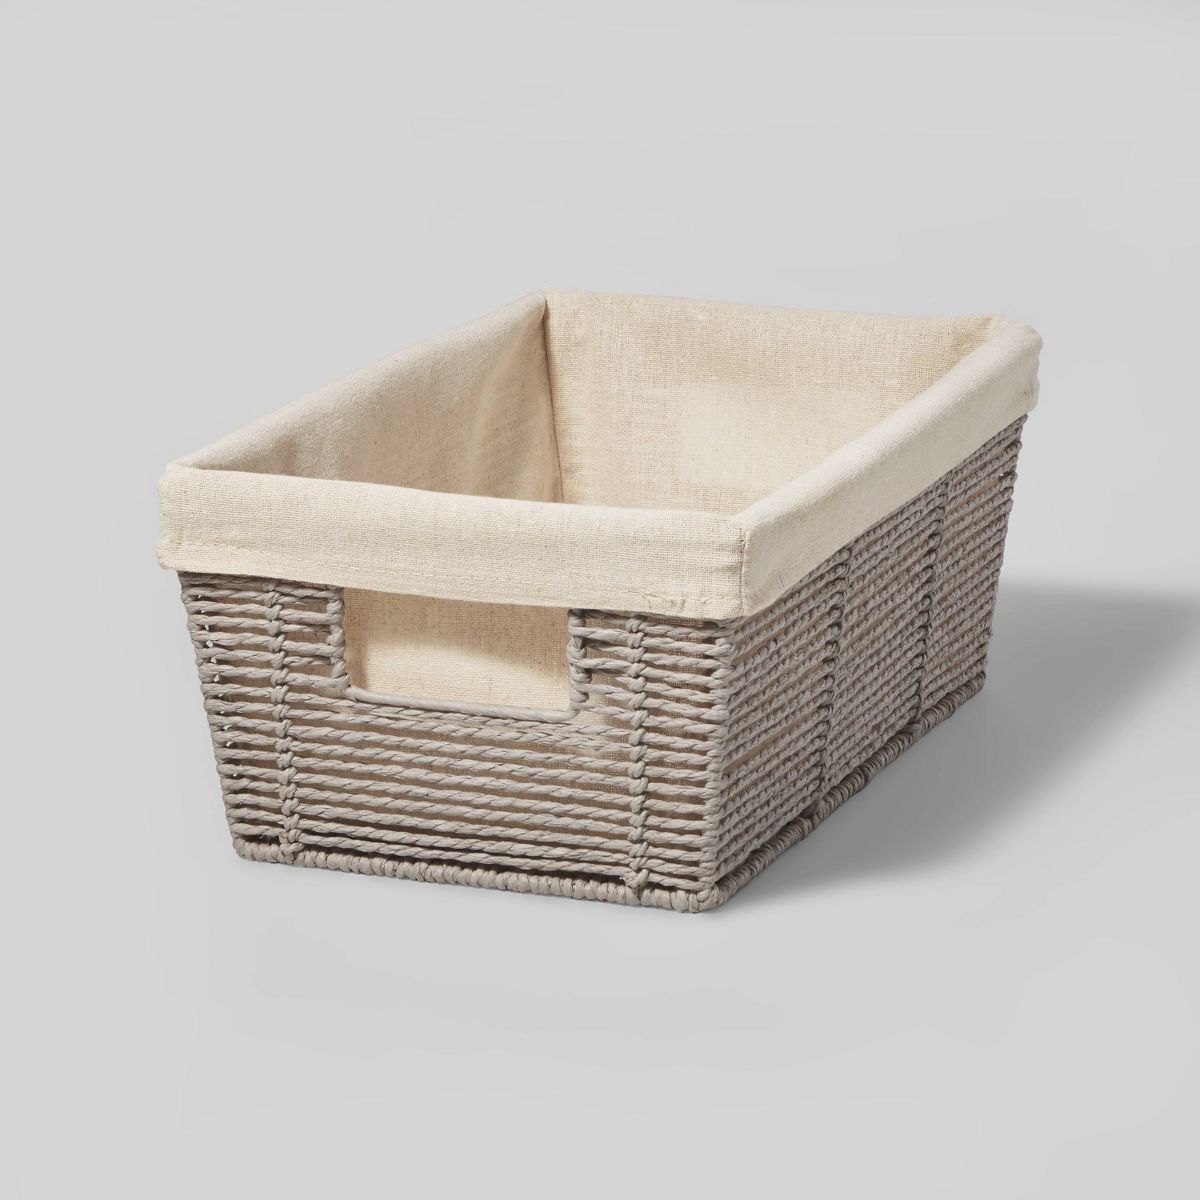 16" x 9" x 6" Woven Twisted Paper Rope Media Basket Gray - Brightroom™ | Target